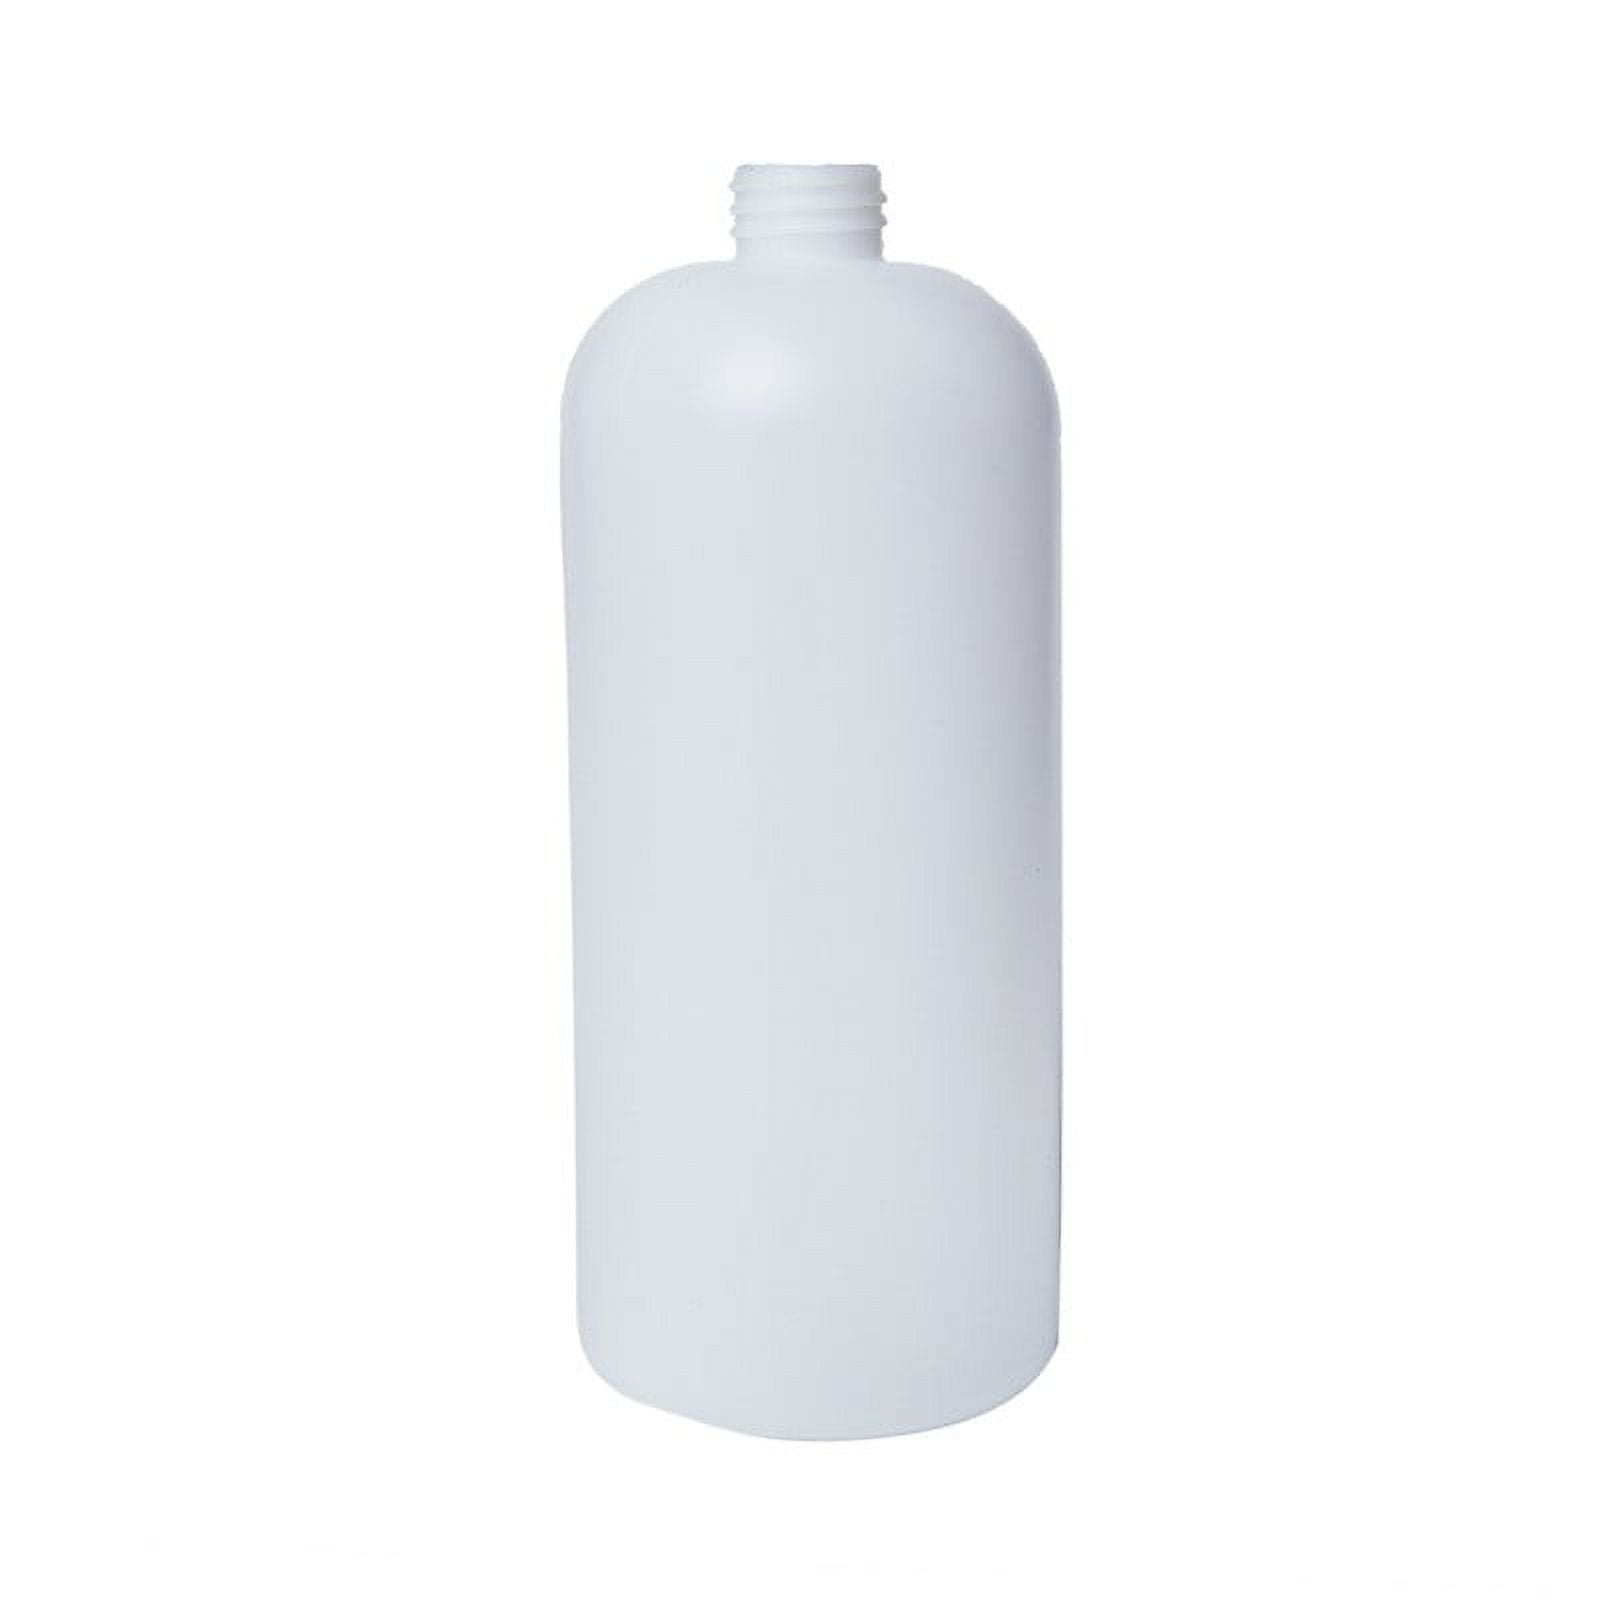 Foaming Bottle High Pressure Car Wash Cleaning ER with 3 Replacement Adapter, 3L Capacity, Size: 36cmx22cmx15cm, White